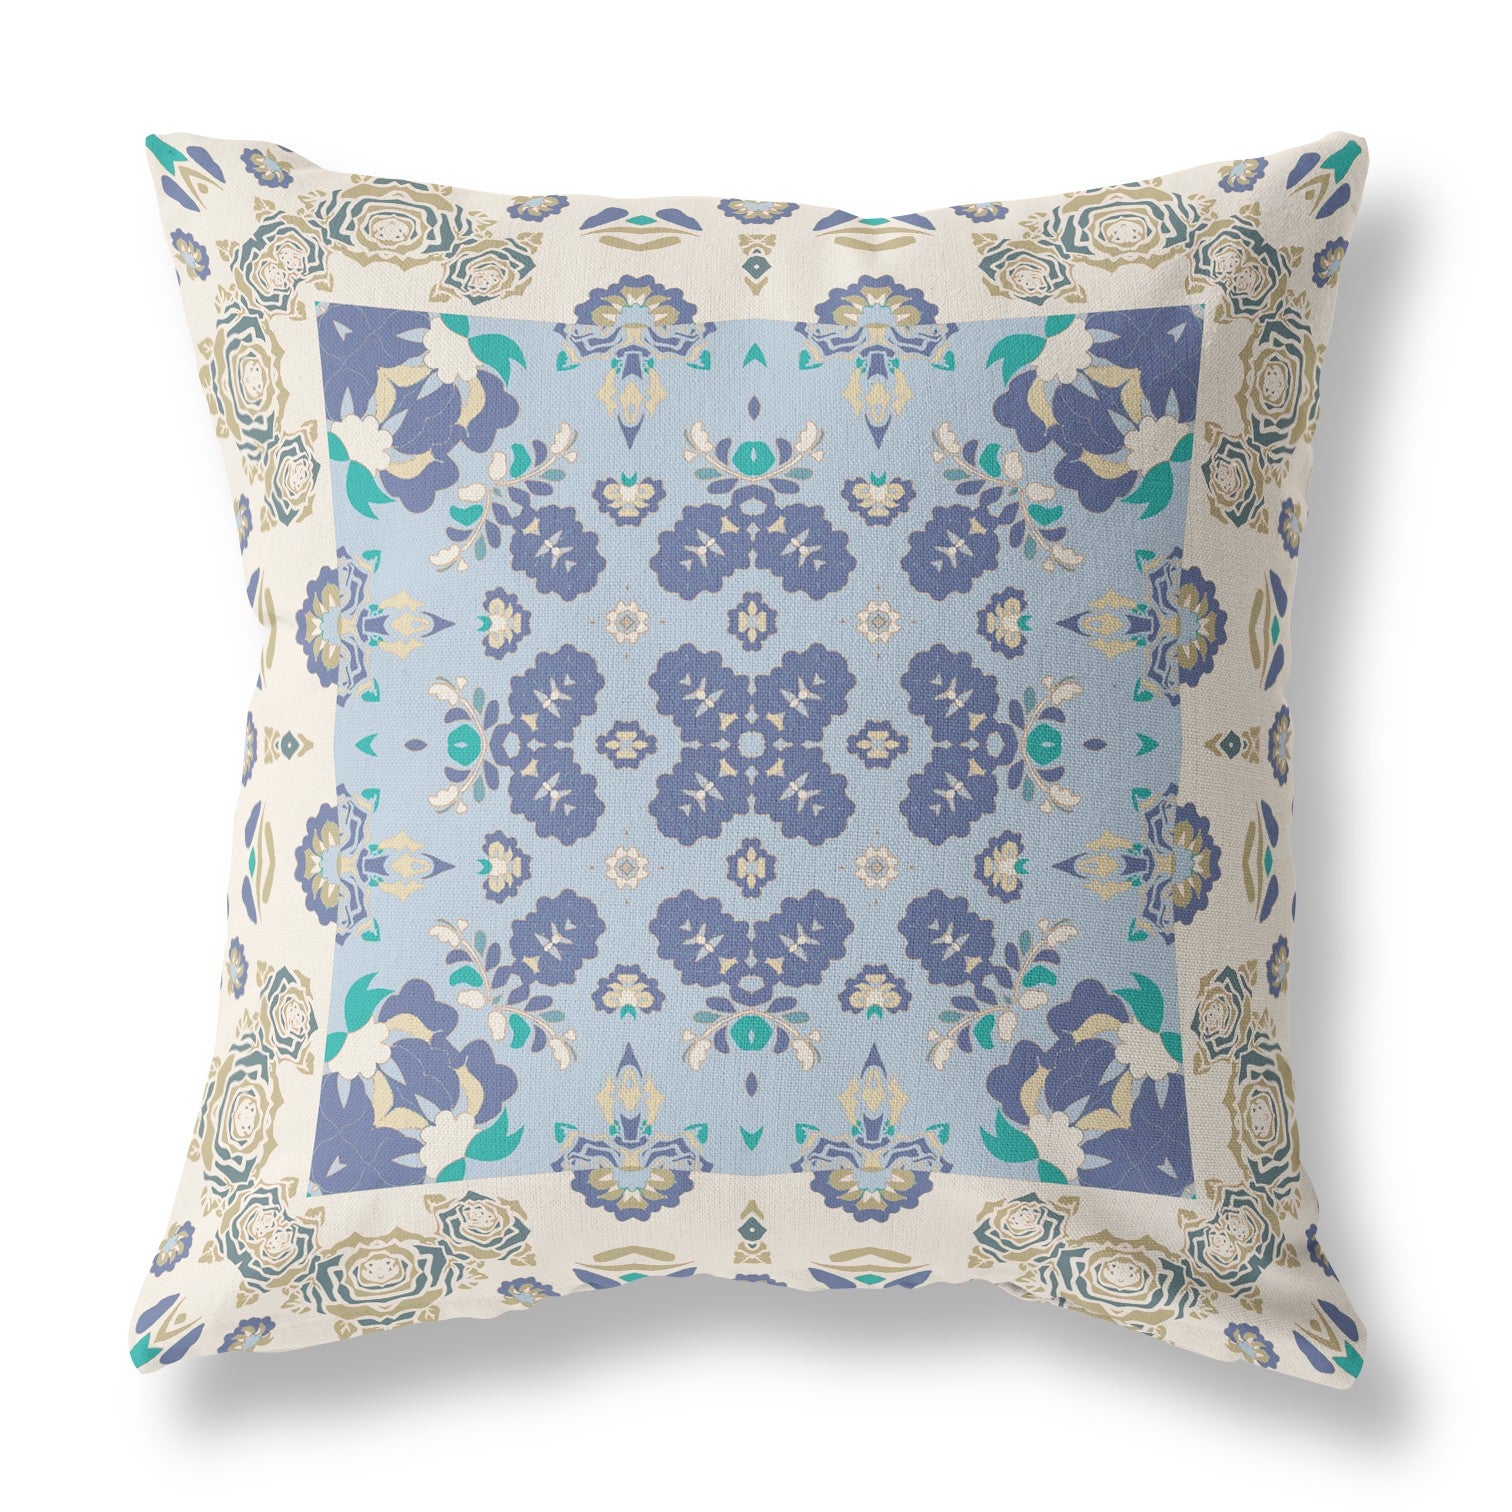 16” White Blue Rose Box Indoor Outdoor Zippered Throw Pillow